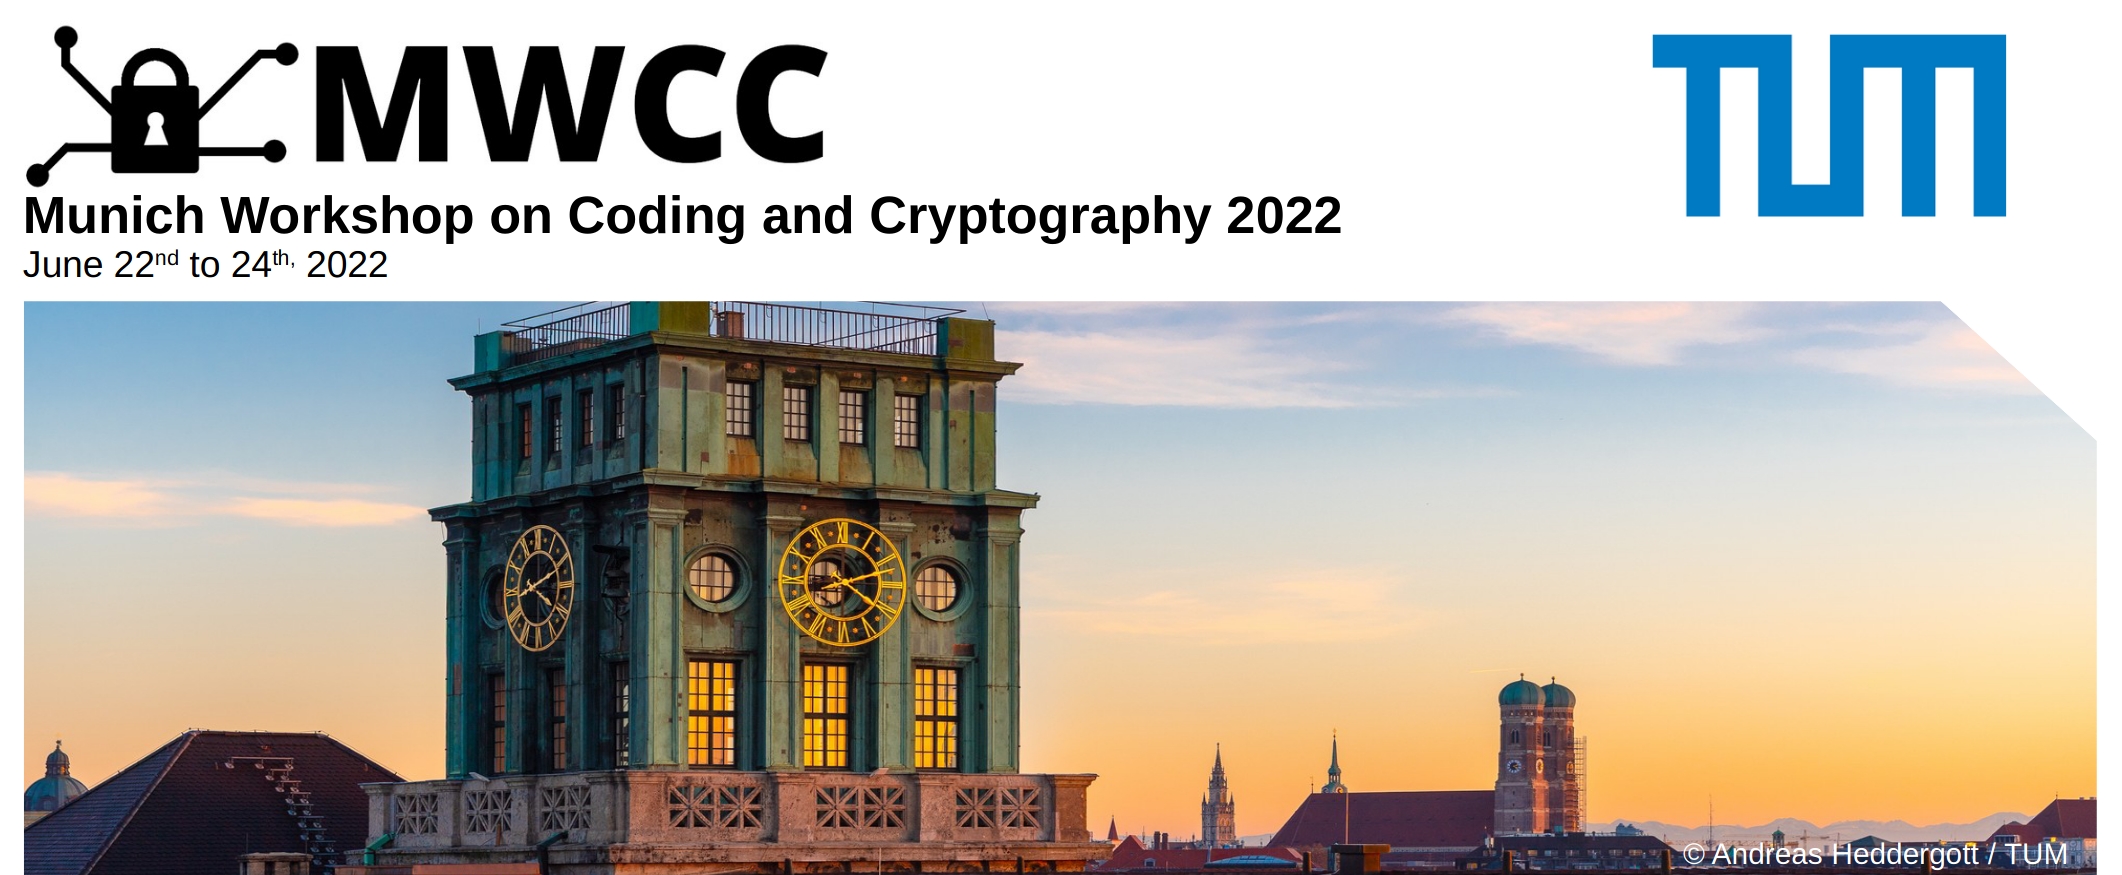 Munich Workshop on Coding and Cryptography